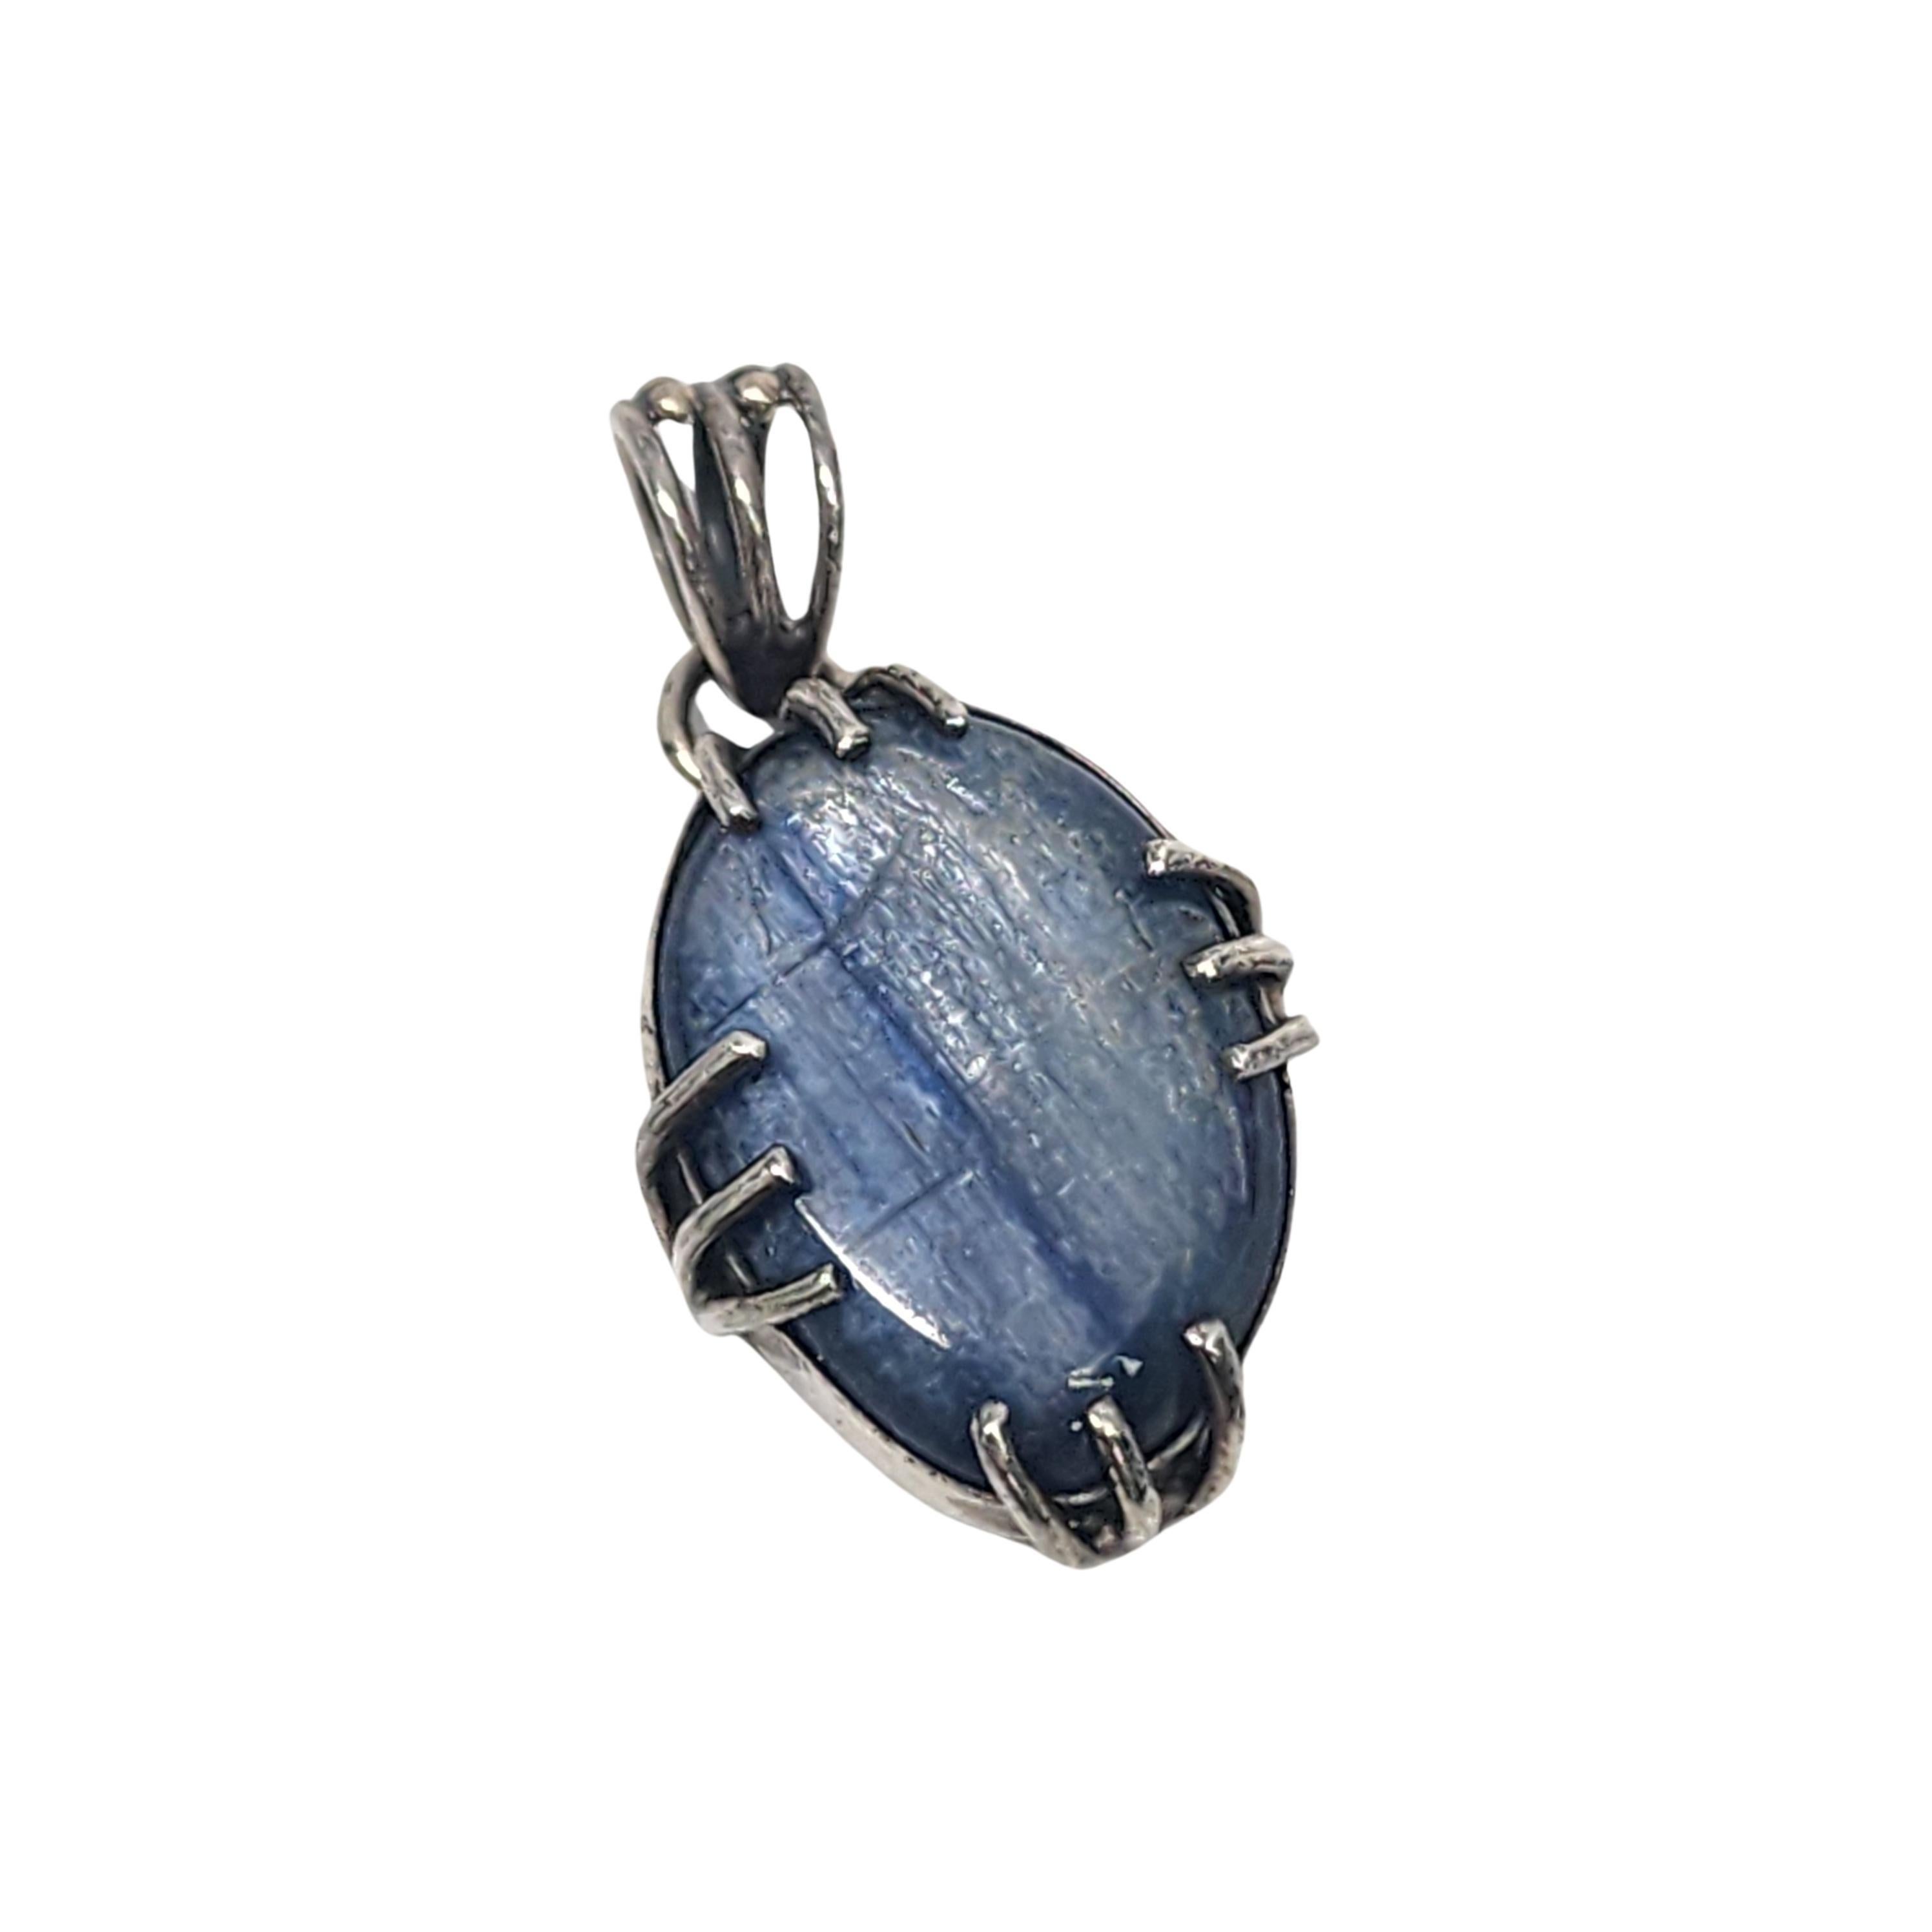 Native American Silver Kyanite Pendant #16495 In Good Condition For Sale In Washington Depot, CT